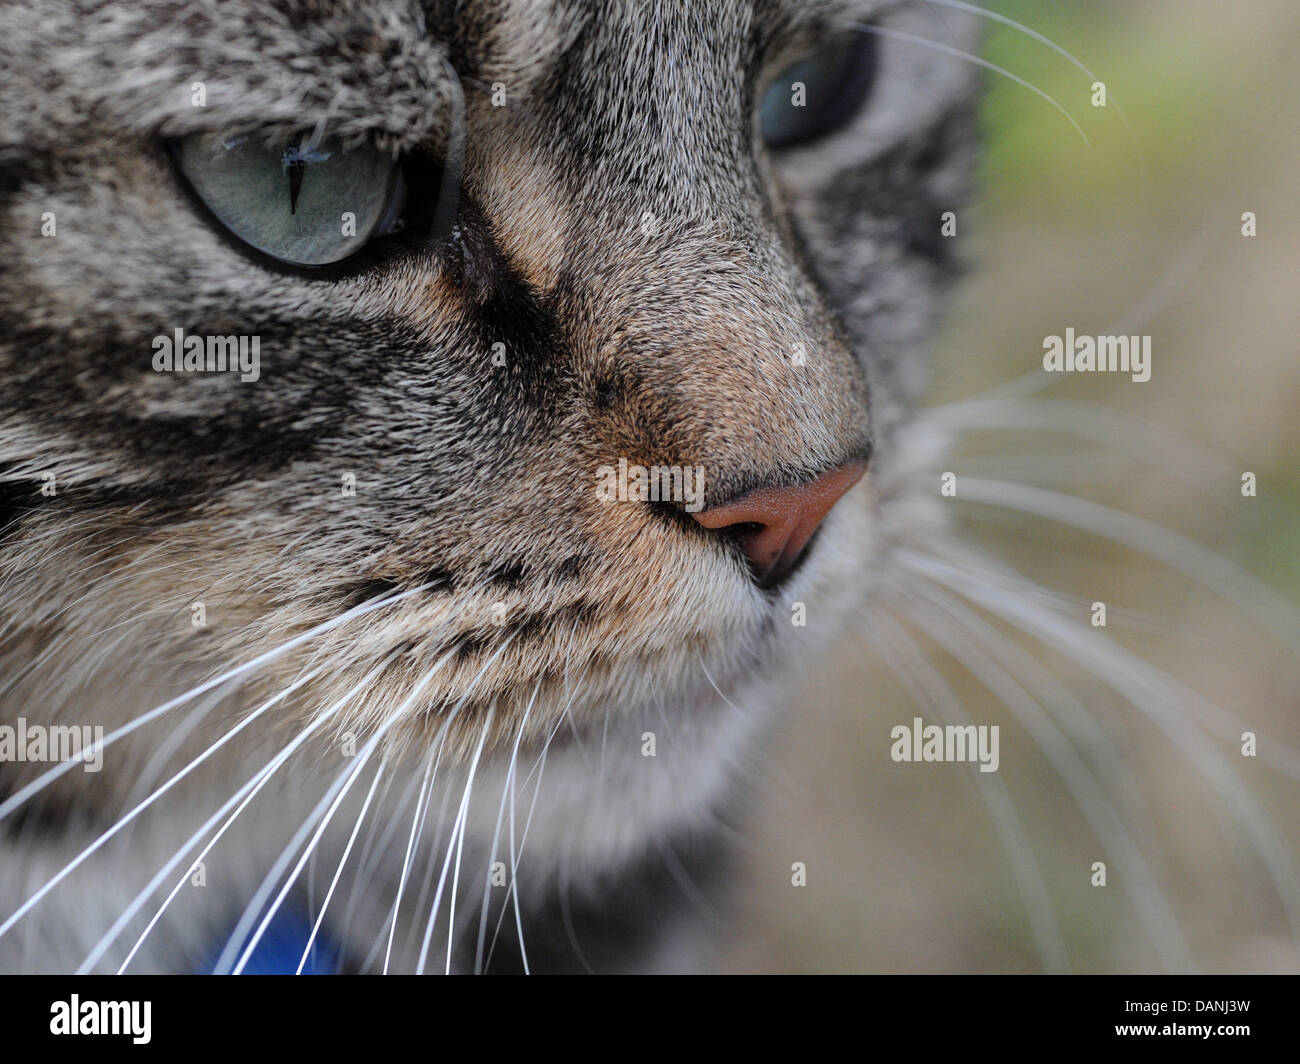 A close up of a tabby cat's face. Stock Photo